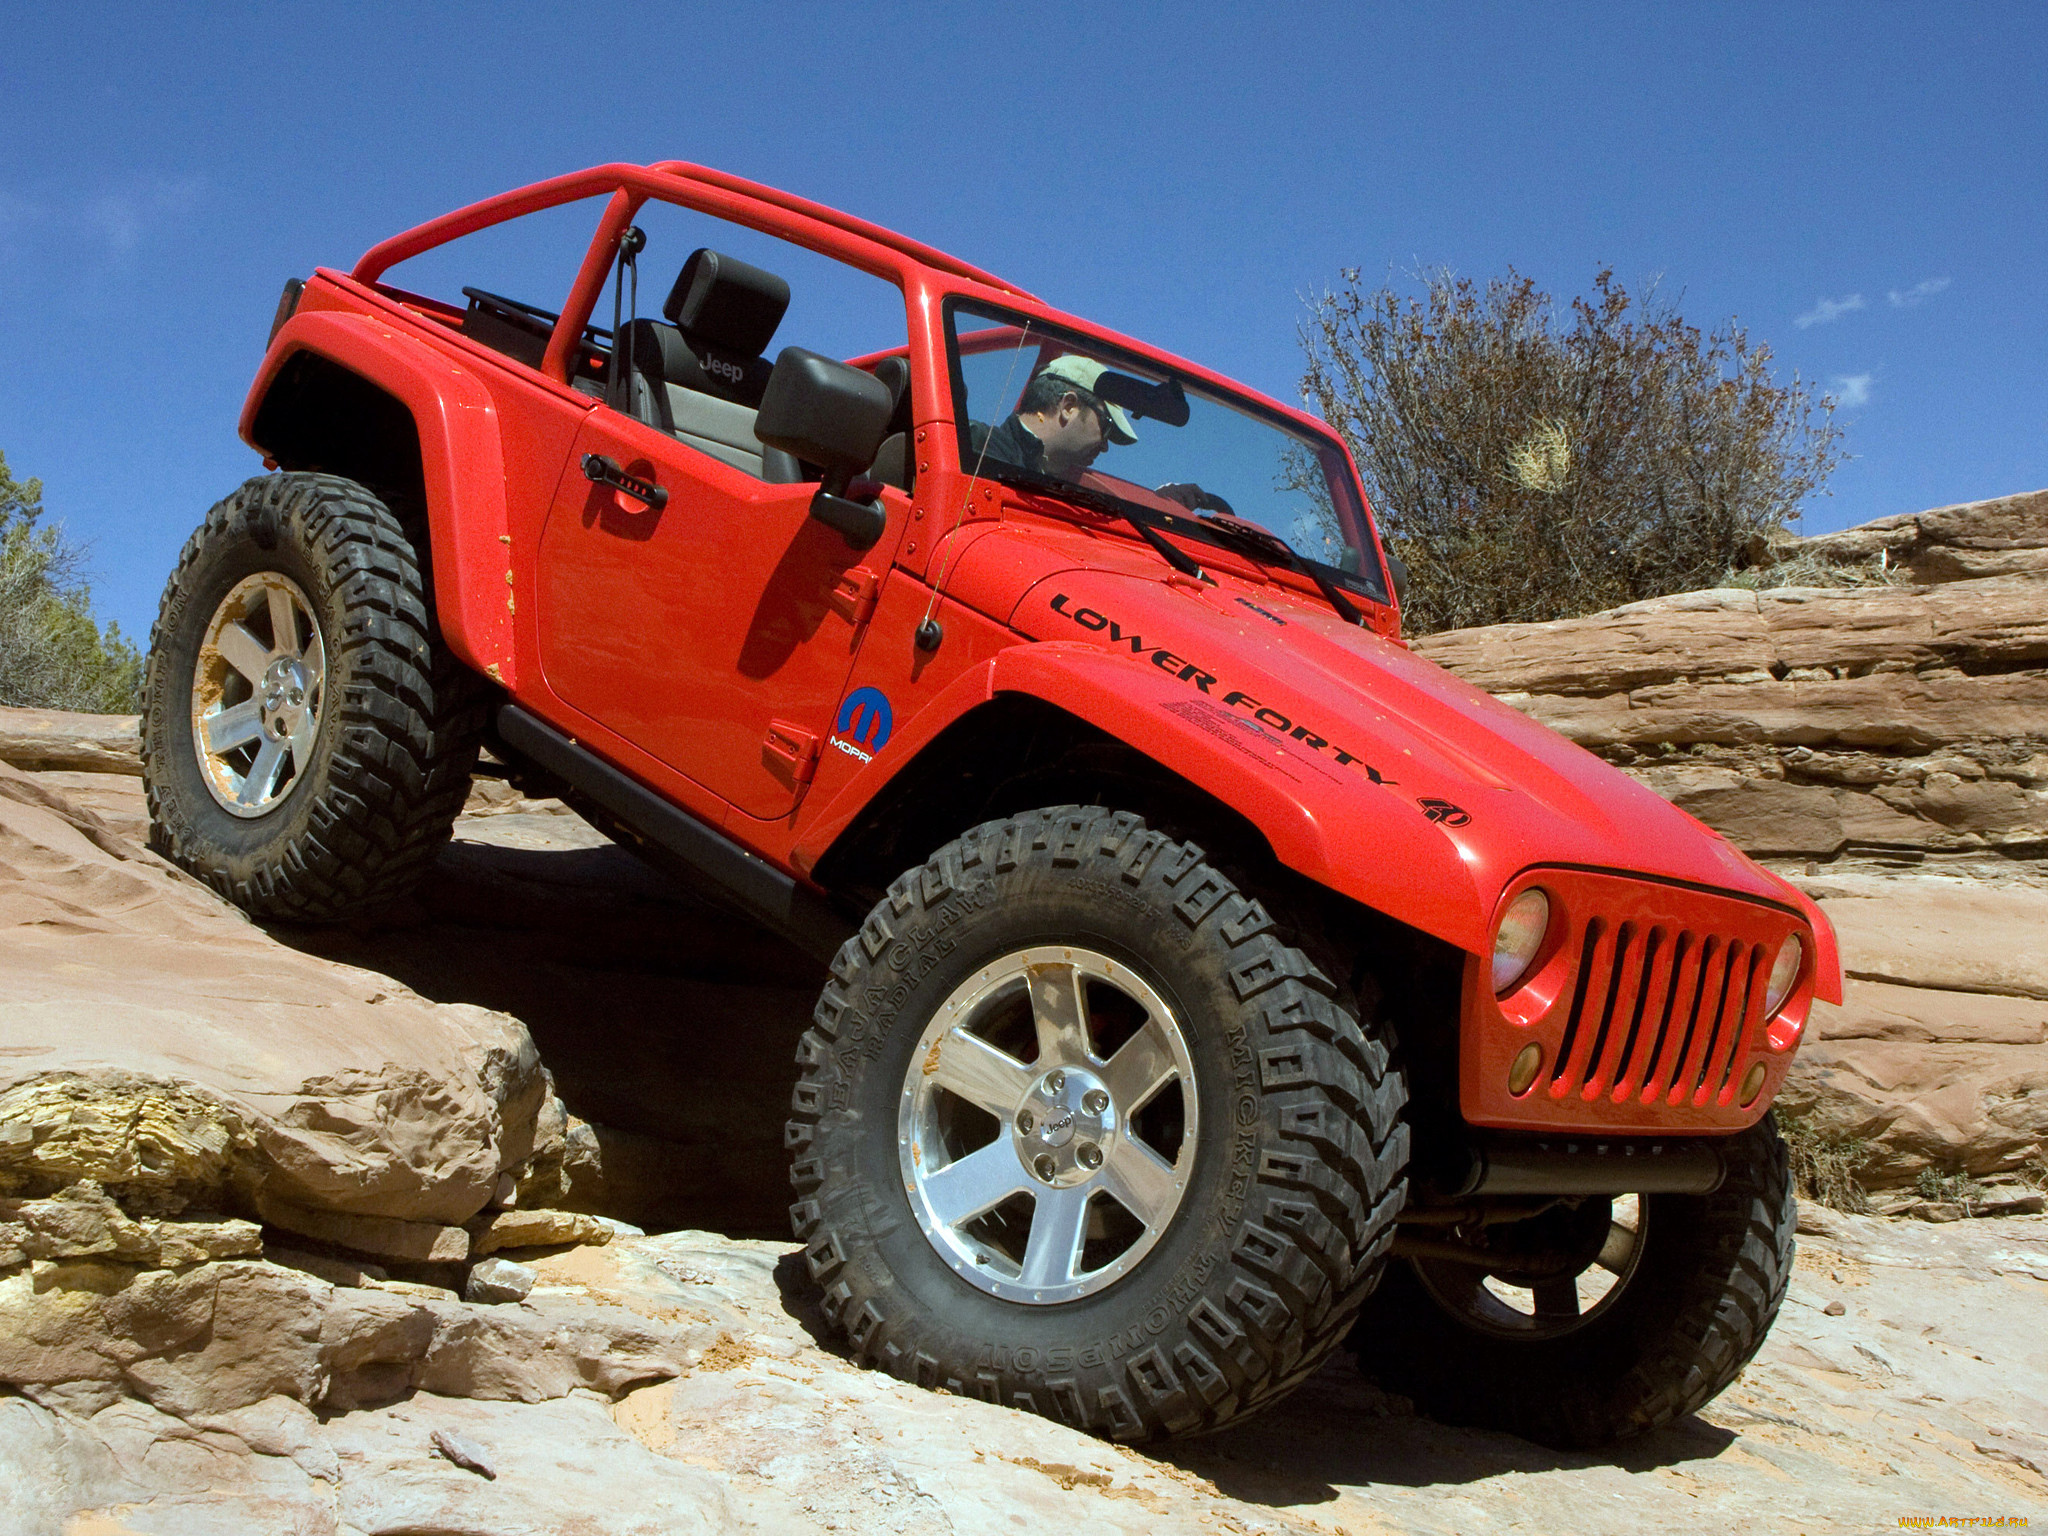 jeep lower forty concept 2009, , jeep, concept, forty, lower, 2009